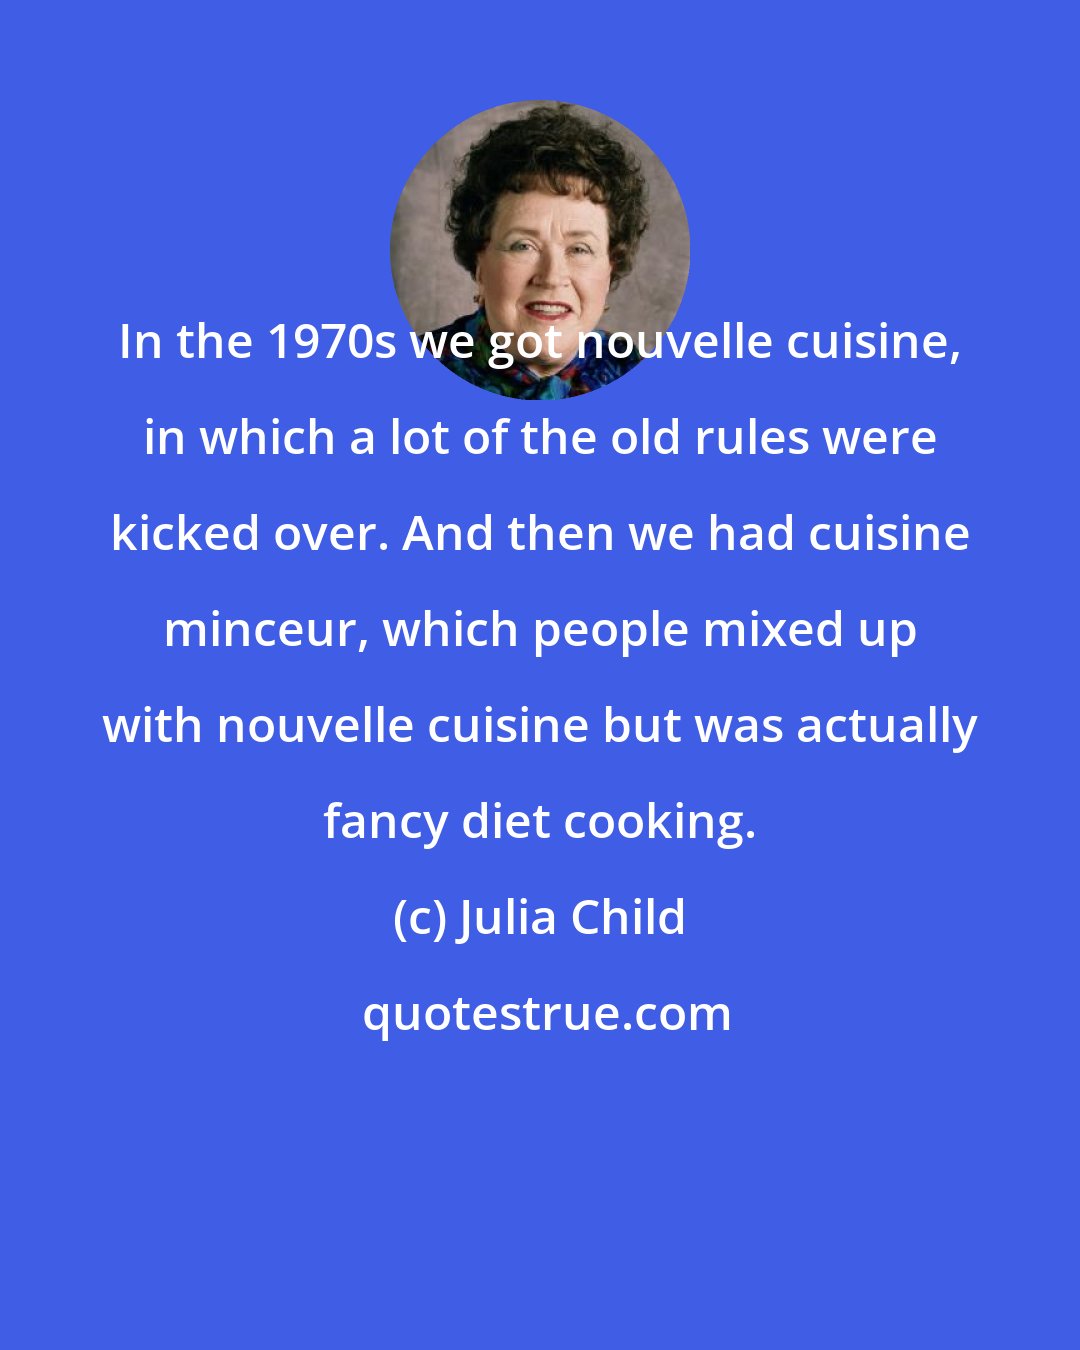 Julia Child: In the 1970s we got nouvelle cuisine, in which a lot of the old rules were kicked over. And then we had cuisine minceur, which people mixed up with nouvelle cuisine but was actually fancy diet cooking.